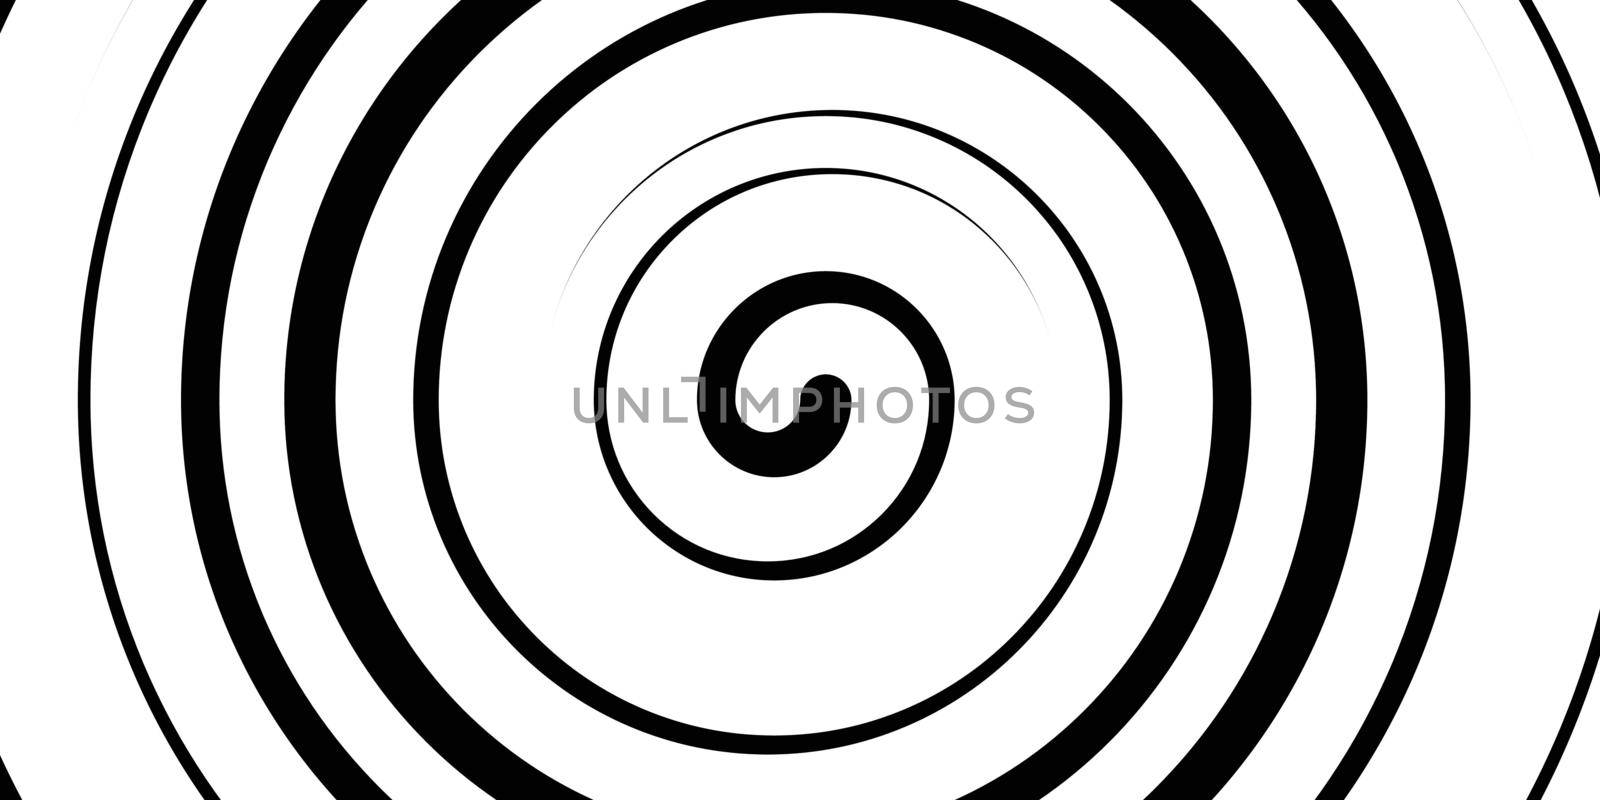 Swirl hypnotic black and white spiral. Monochrome abstract background. Vector flat geometric illustration.Template design for banner, website, template, leaflet, brochure, poster.